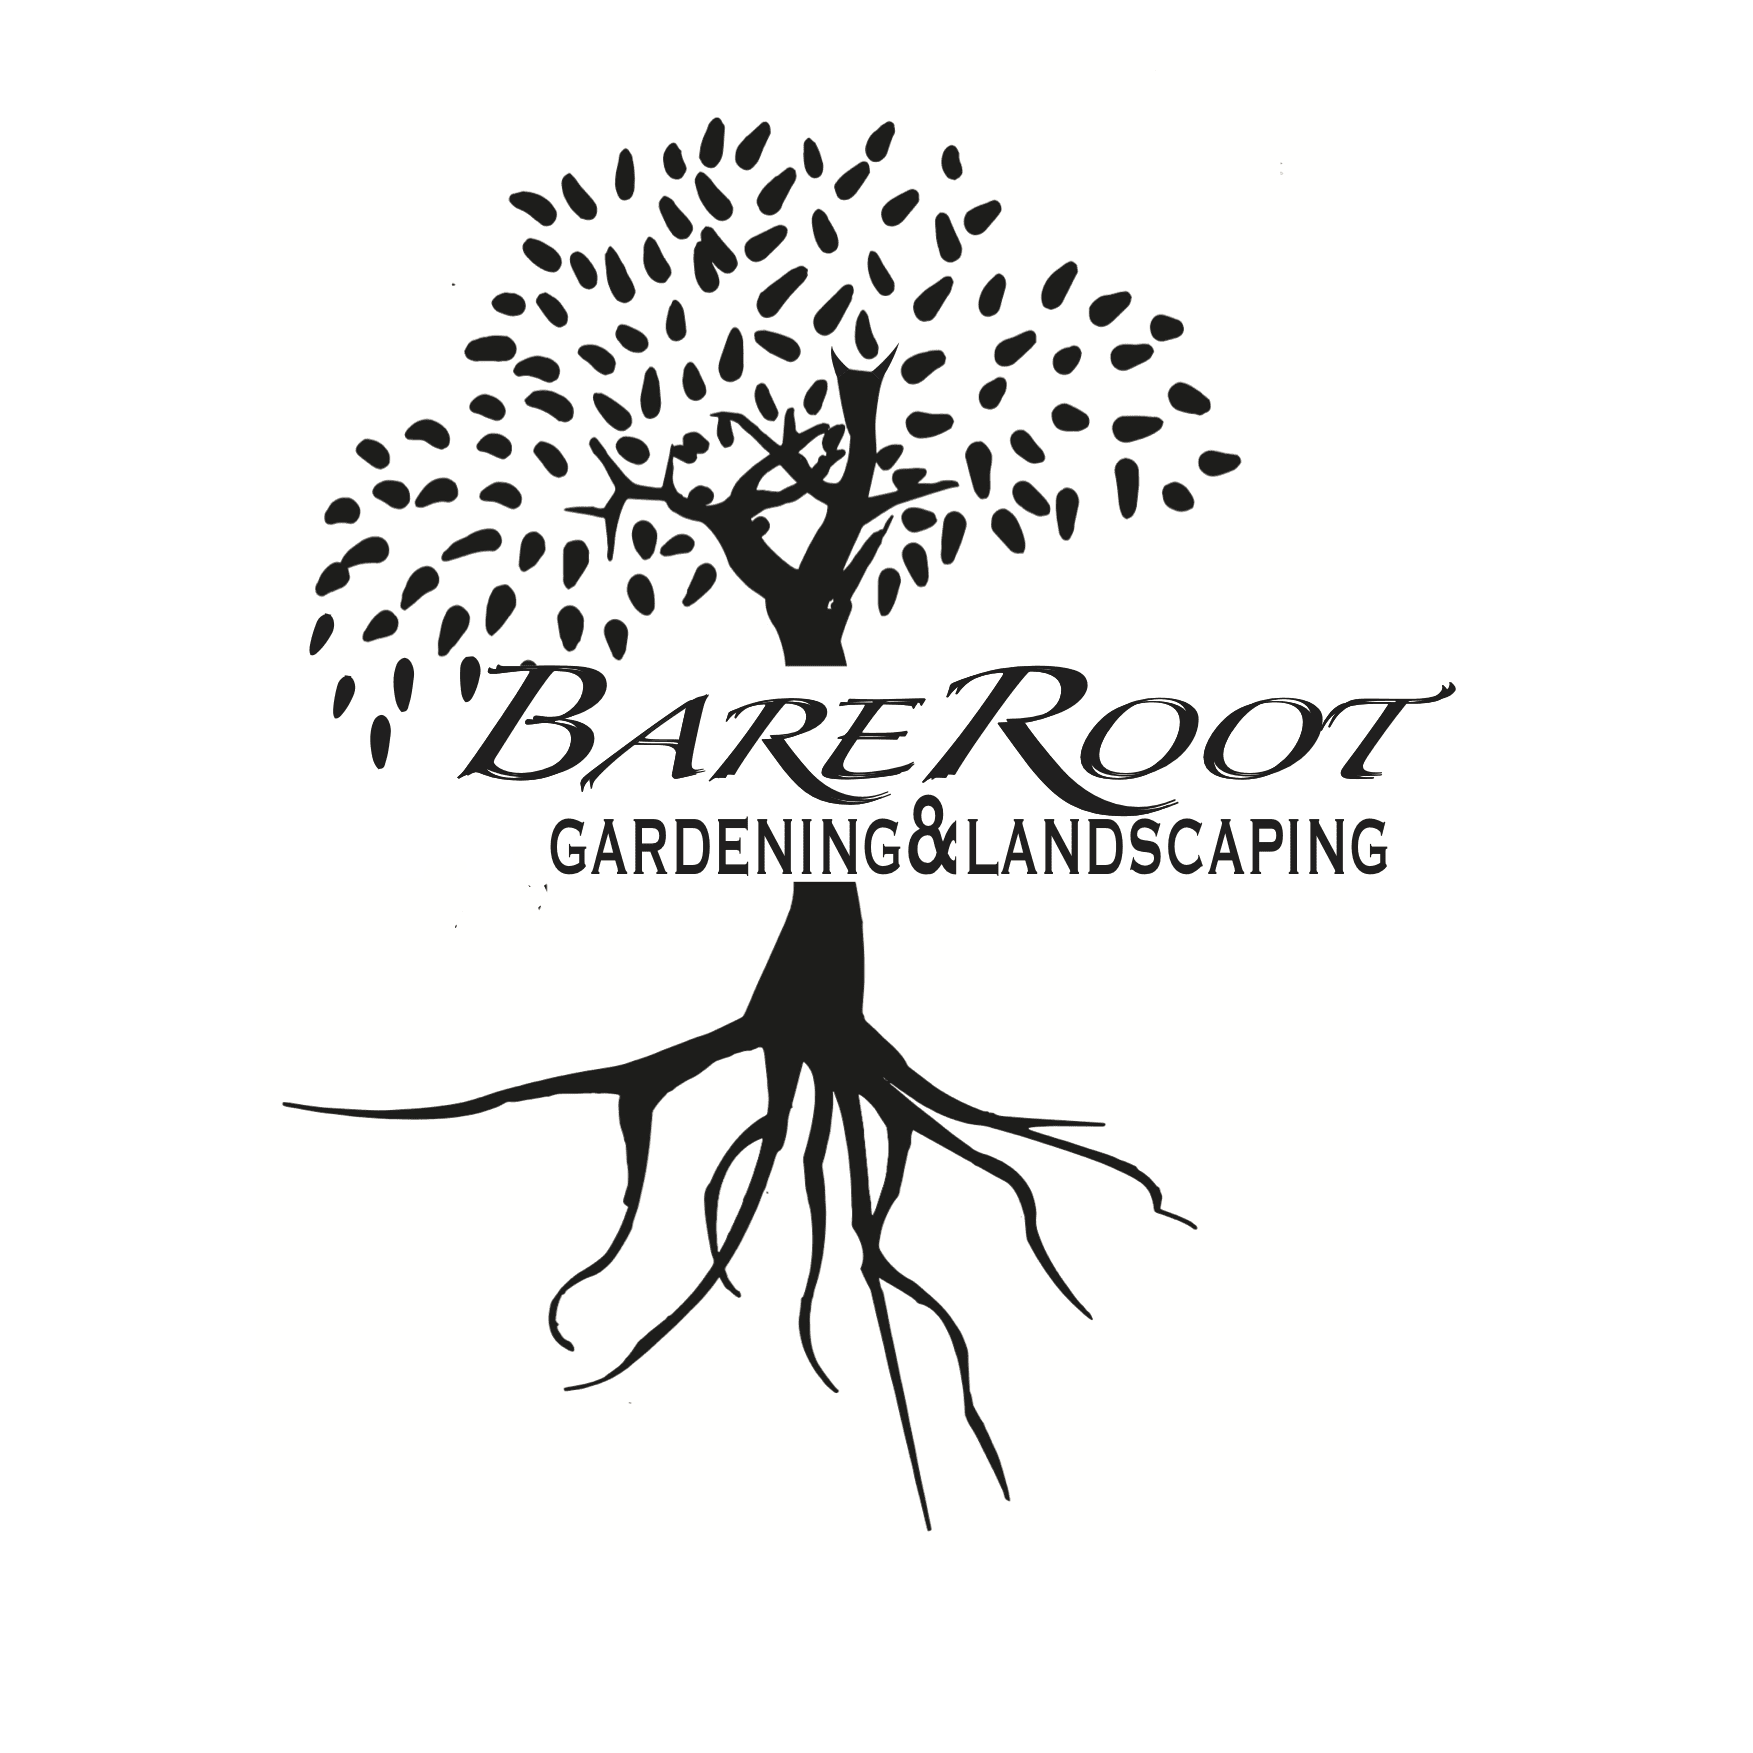 BareRoot Gardening & Landscaping - Scunthorpe, Lincolnshire DN17 3EL - 07495 716847 | ShowMeLocal.com